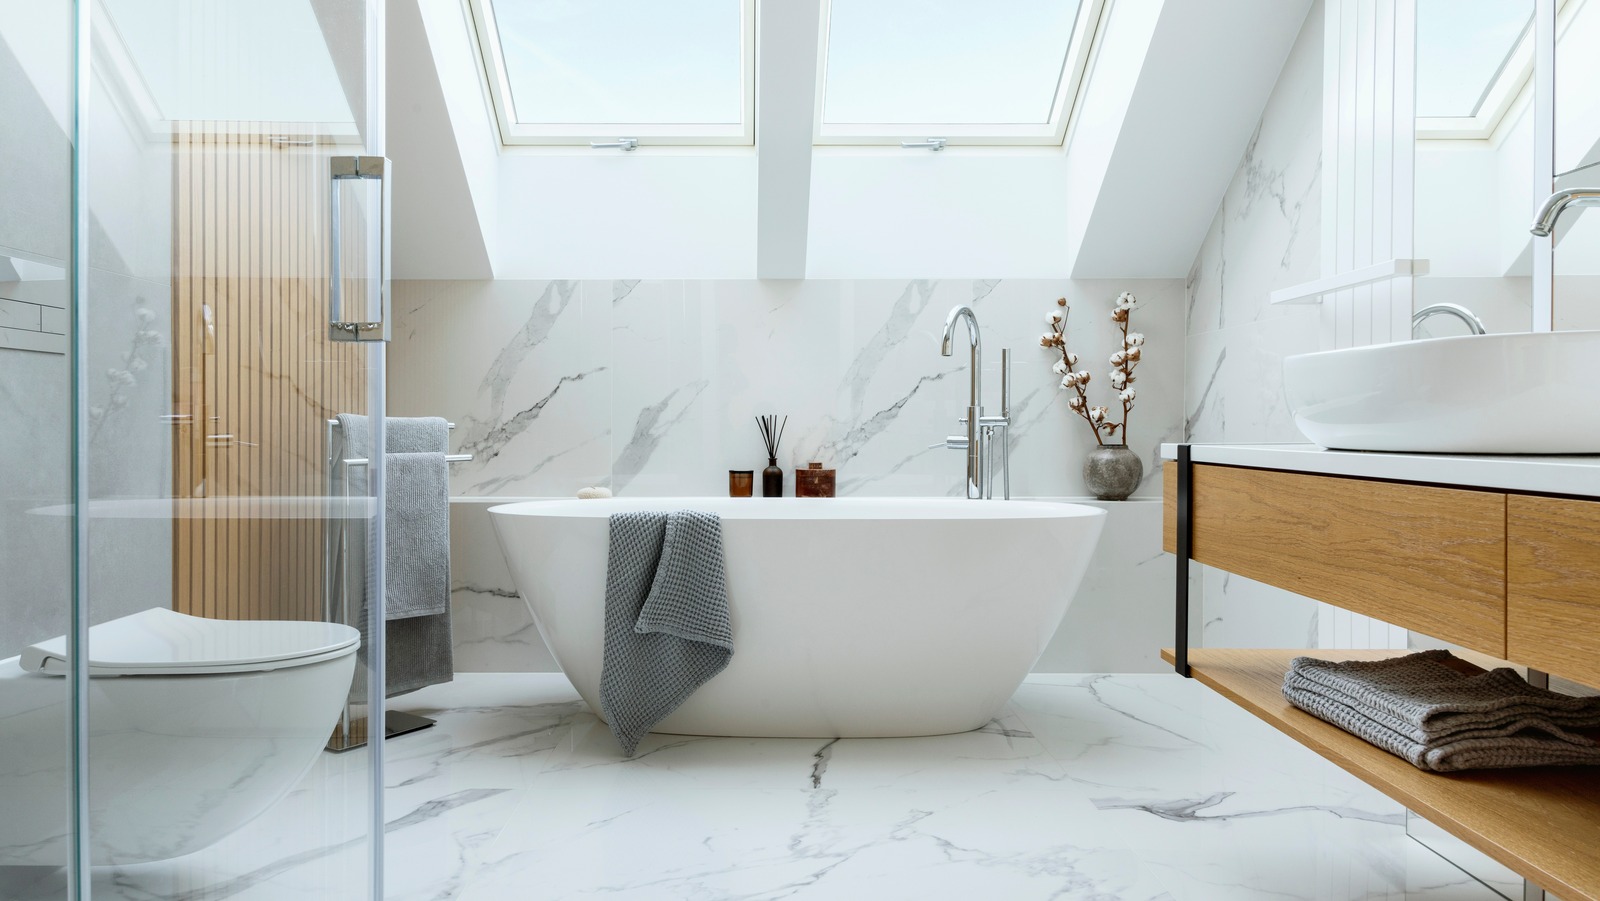 How Much Does It Cost To Build A Bathroom From Scratch?